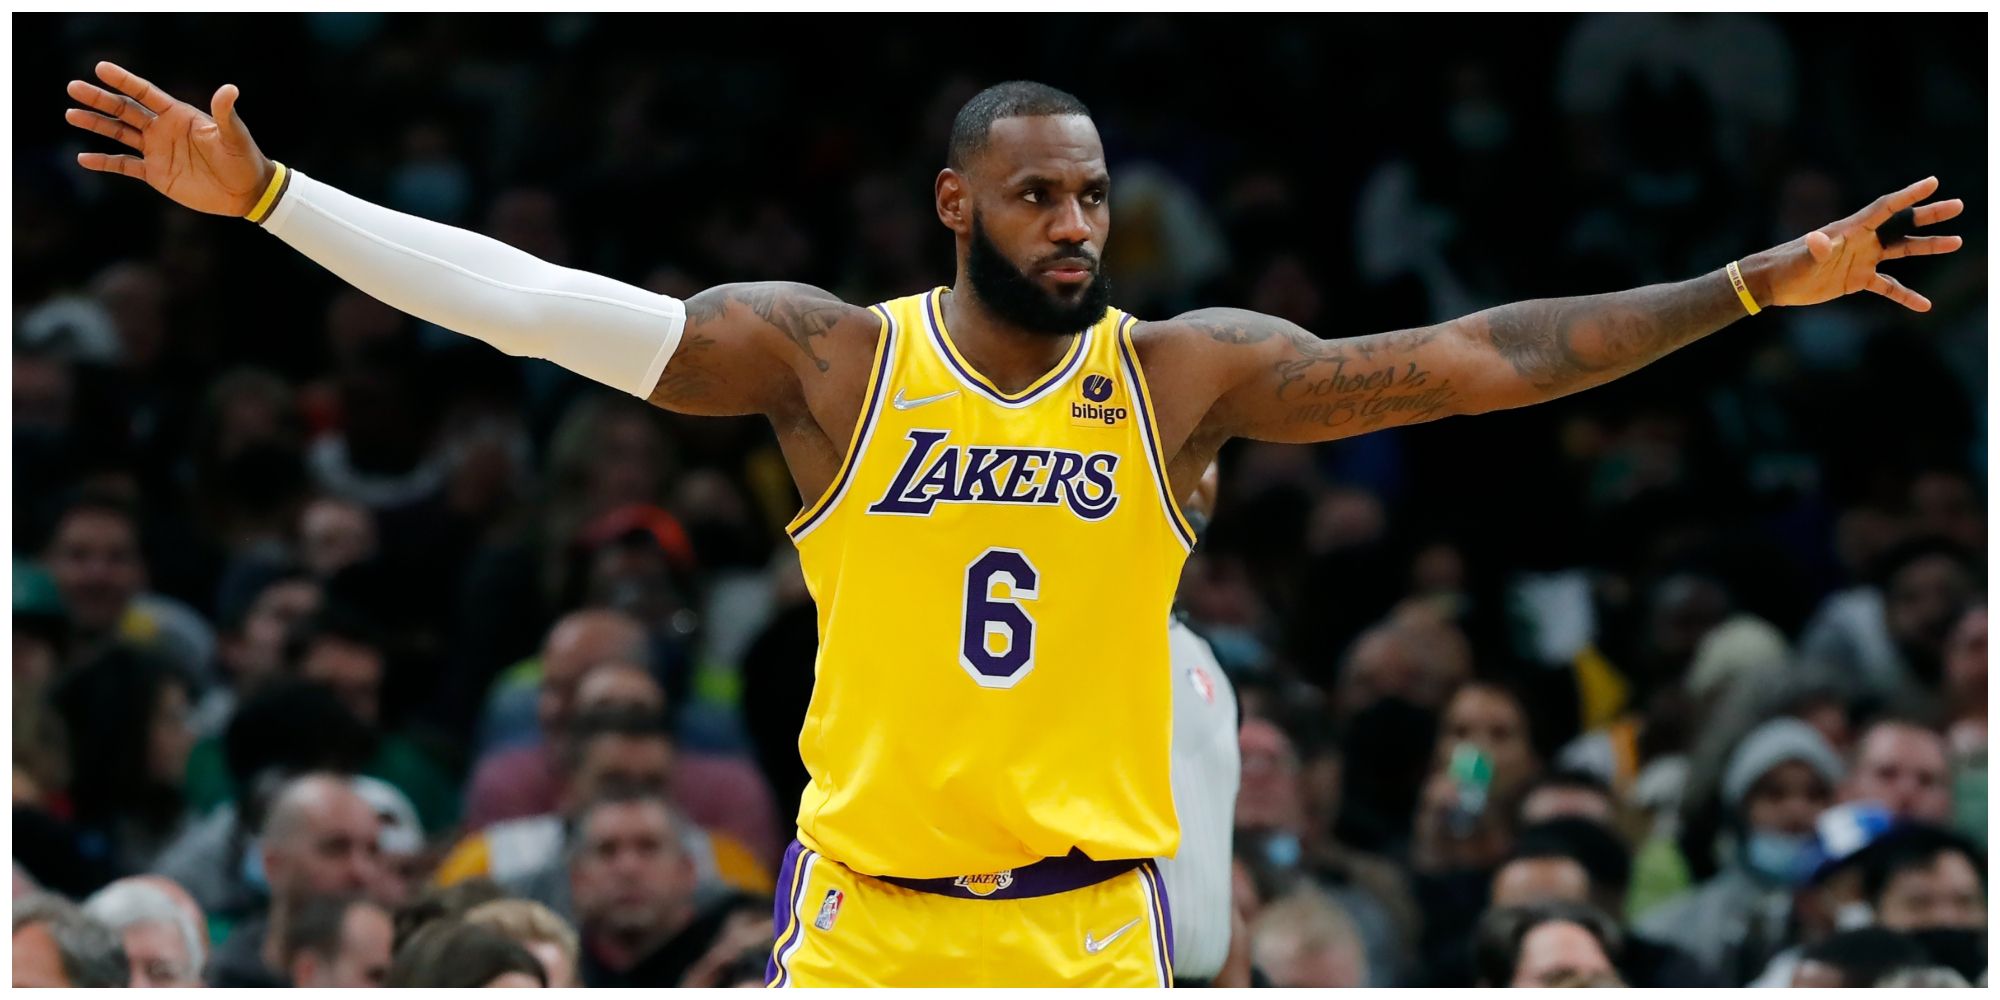 LeBron James of the LA Lakers with his arms outstretched